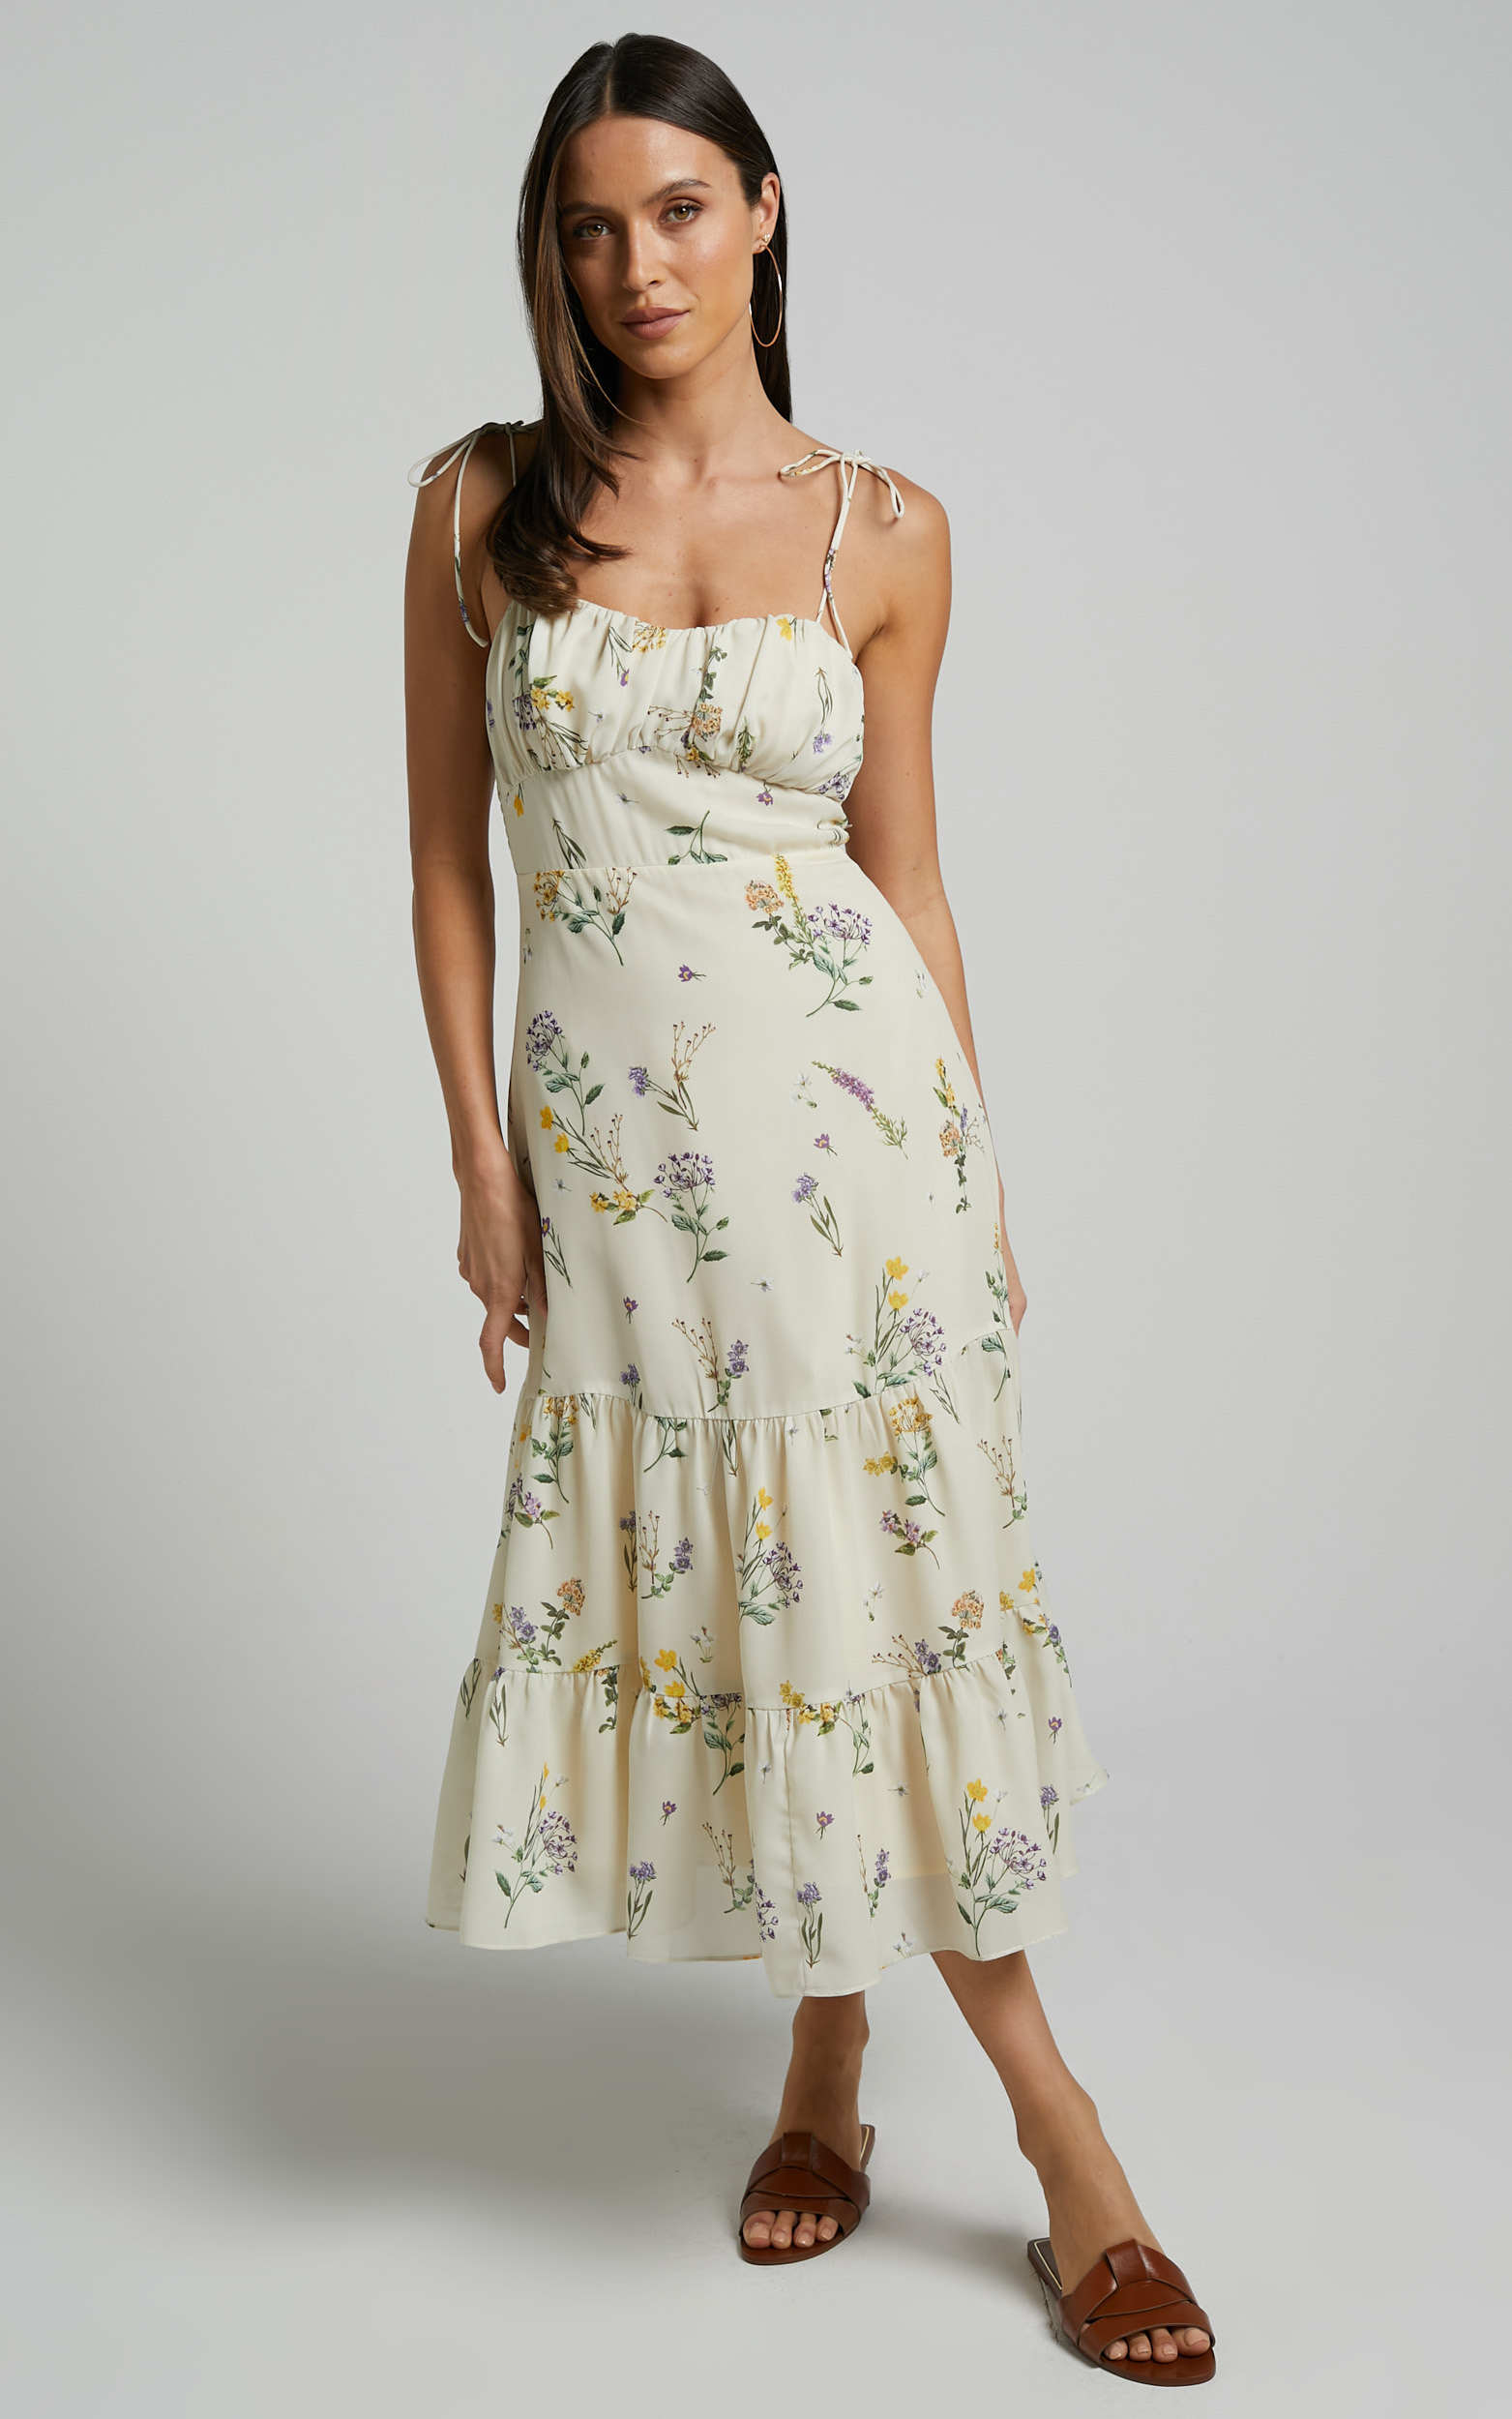 Monaco Sweetheart Midi Dress in Botanical floral - 04, CRE1, hi-res image number null